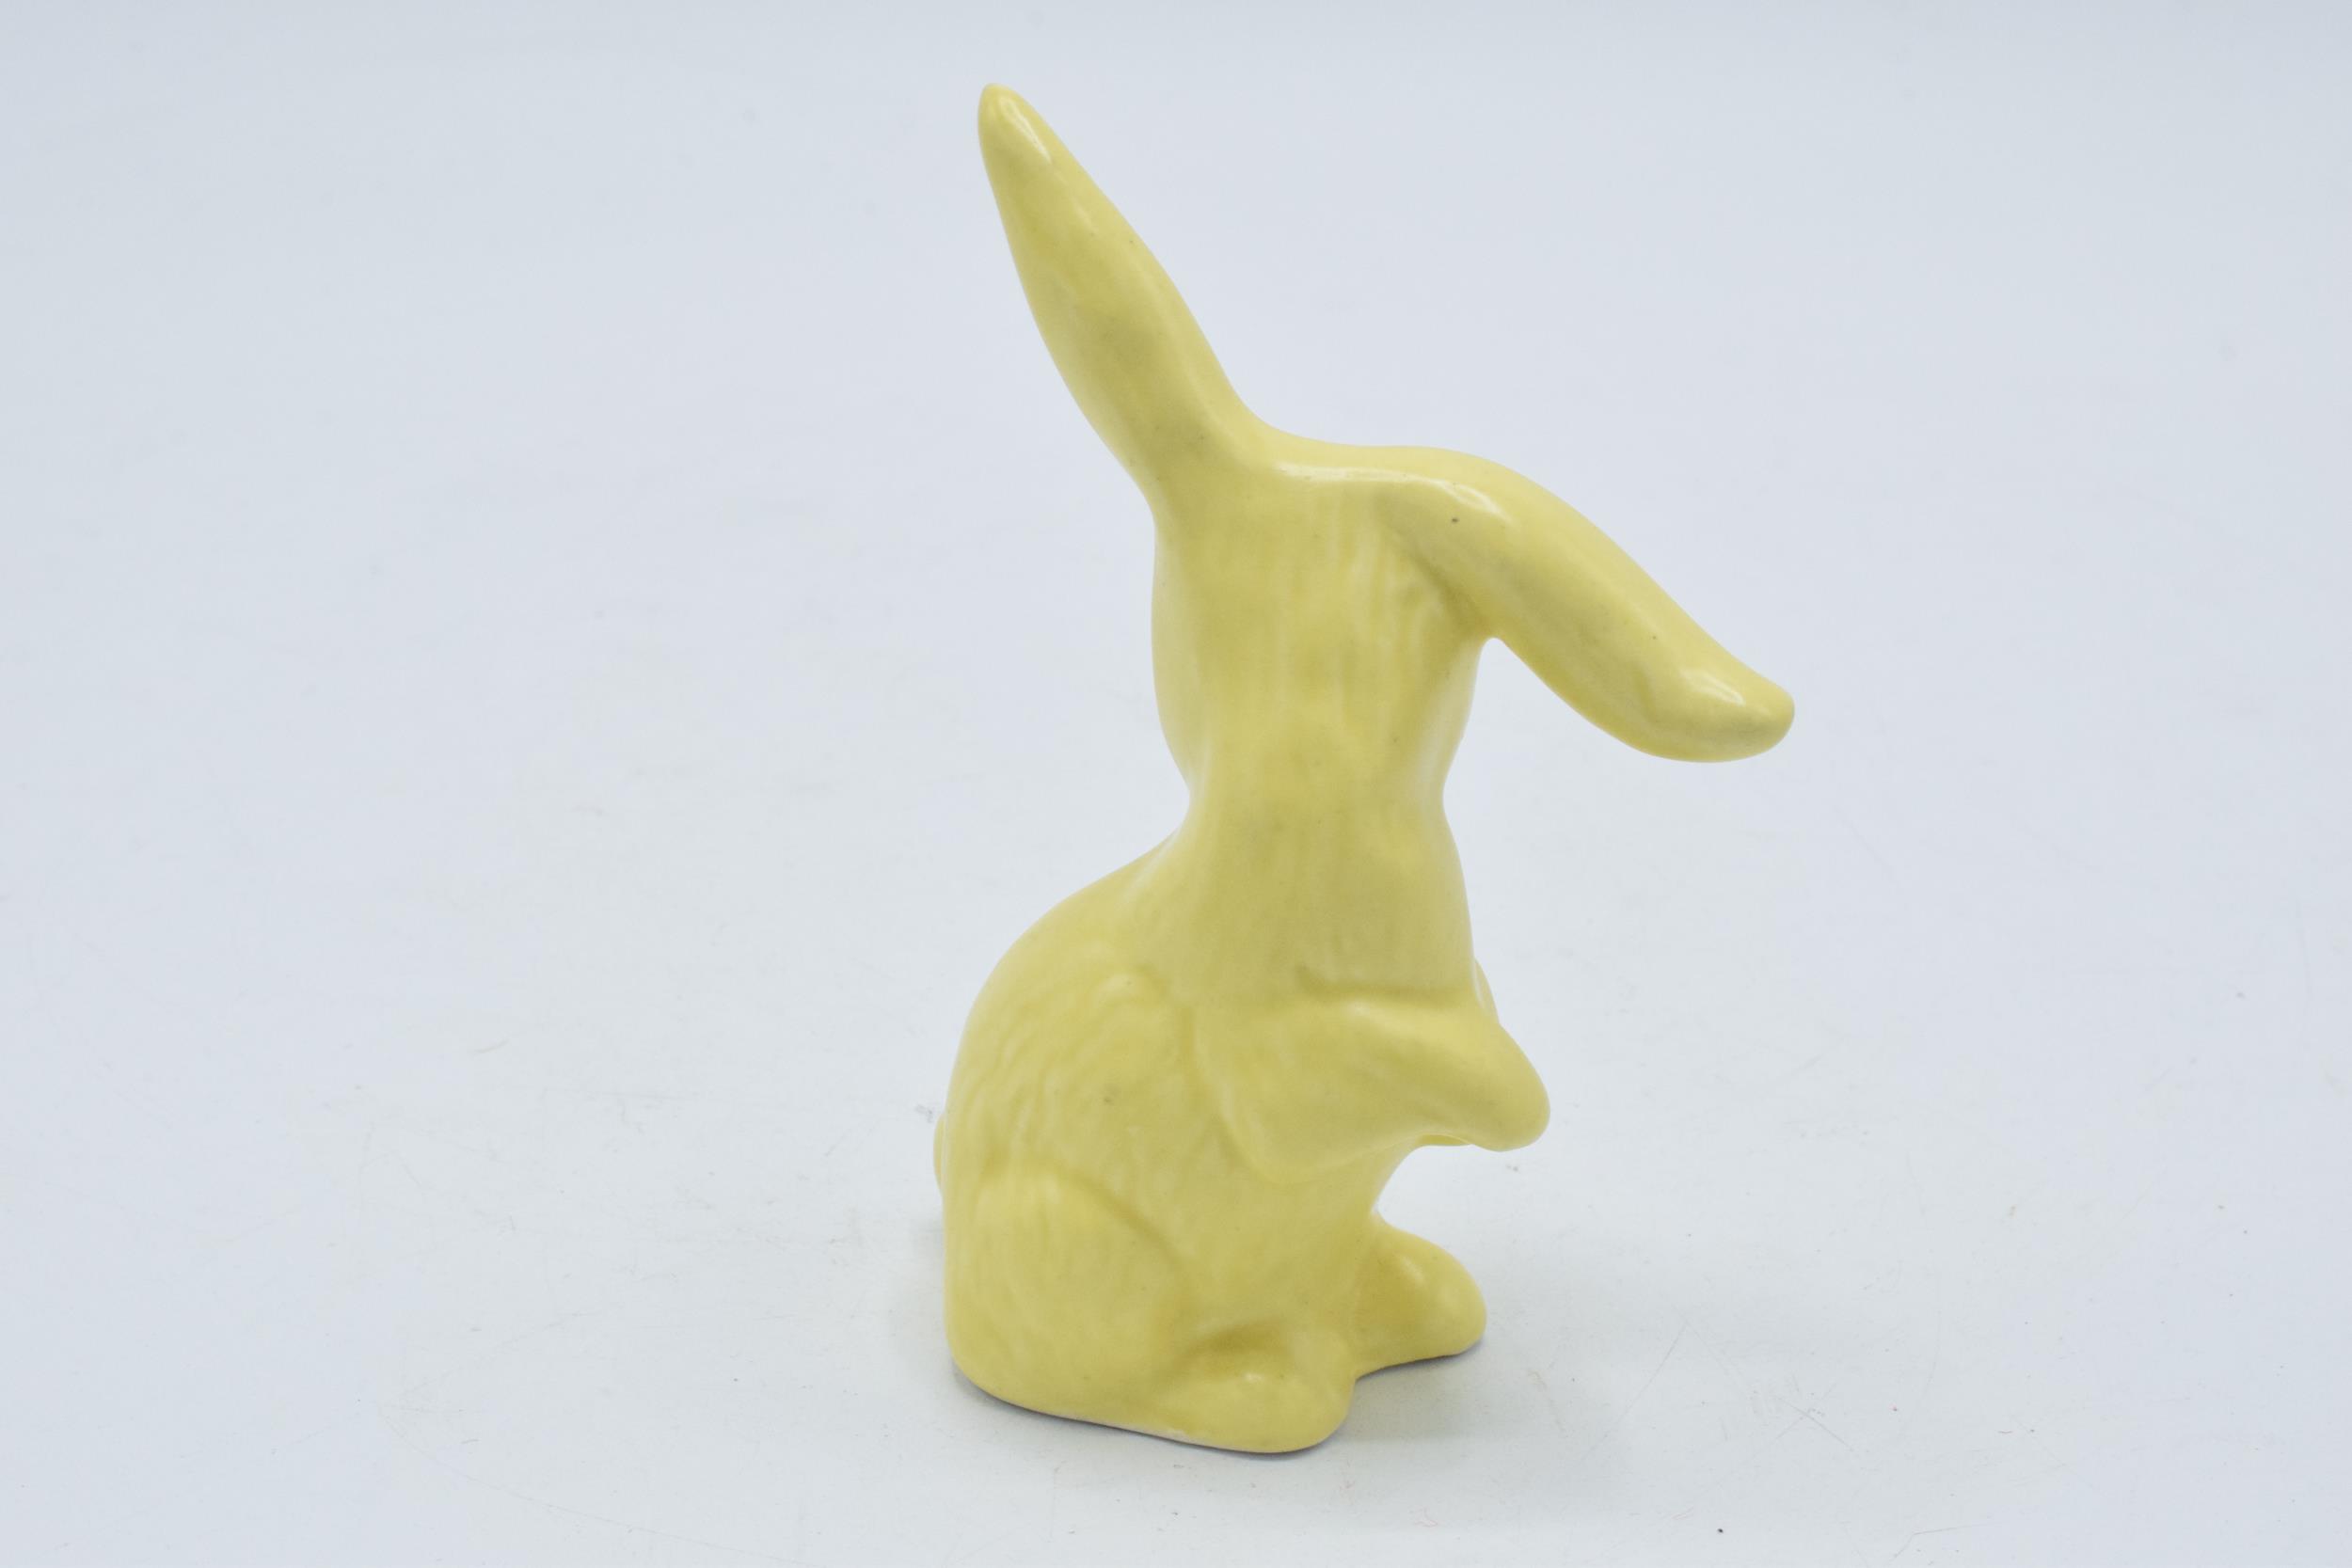 Sylvac lop earred rabbit 1509 in yellow colourway,10cm tall. In good condition with no obvious - Image 2 of 3